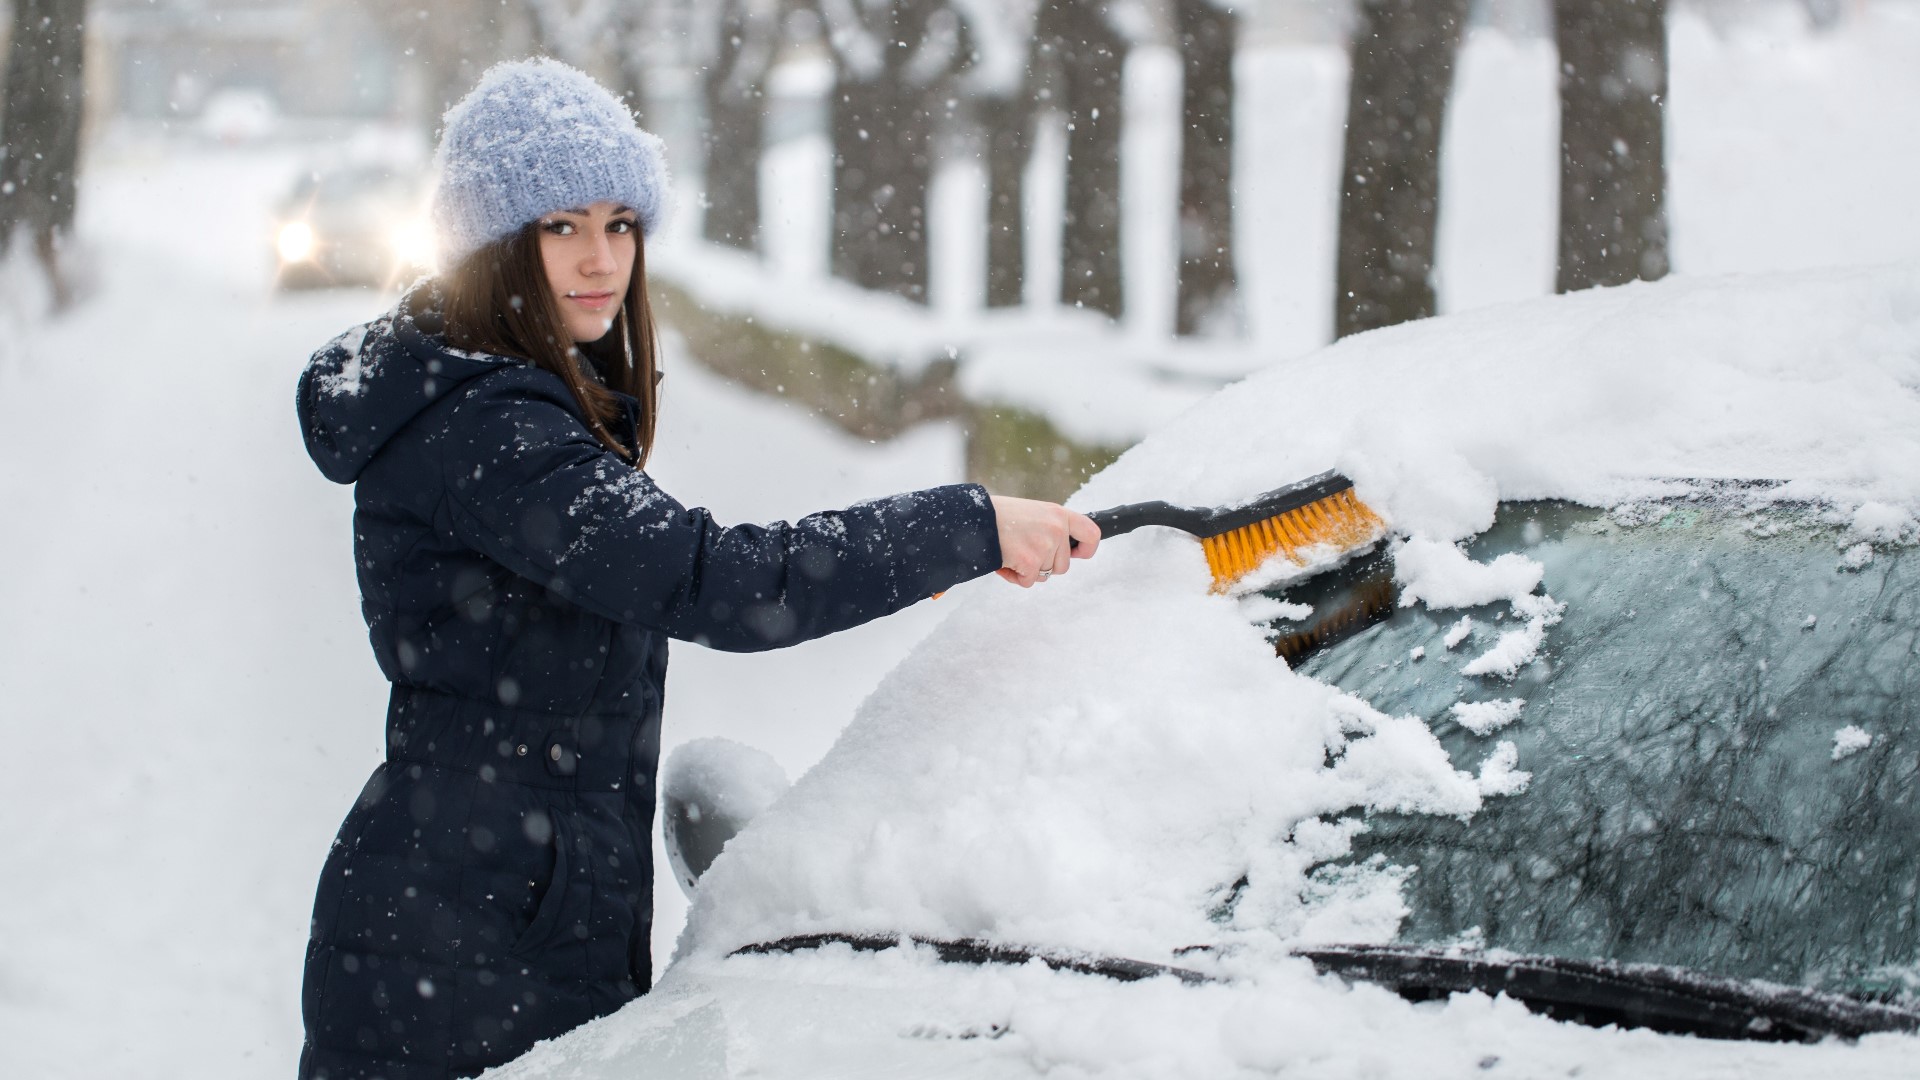 Clearing your car roof, hood and windows of snow is a common safety tip to avoid blinding yourself and other drivers. But it's not technically law in Virginia.